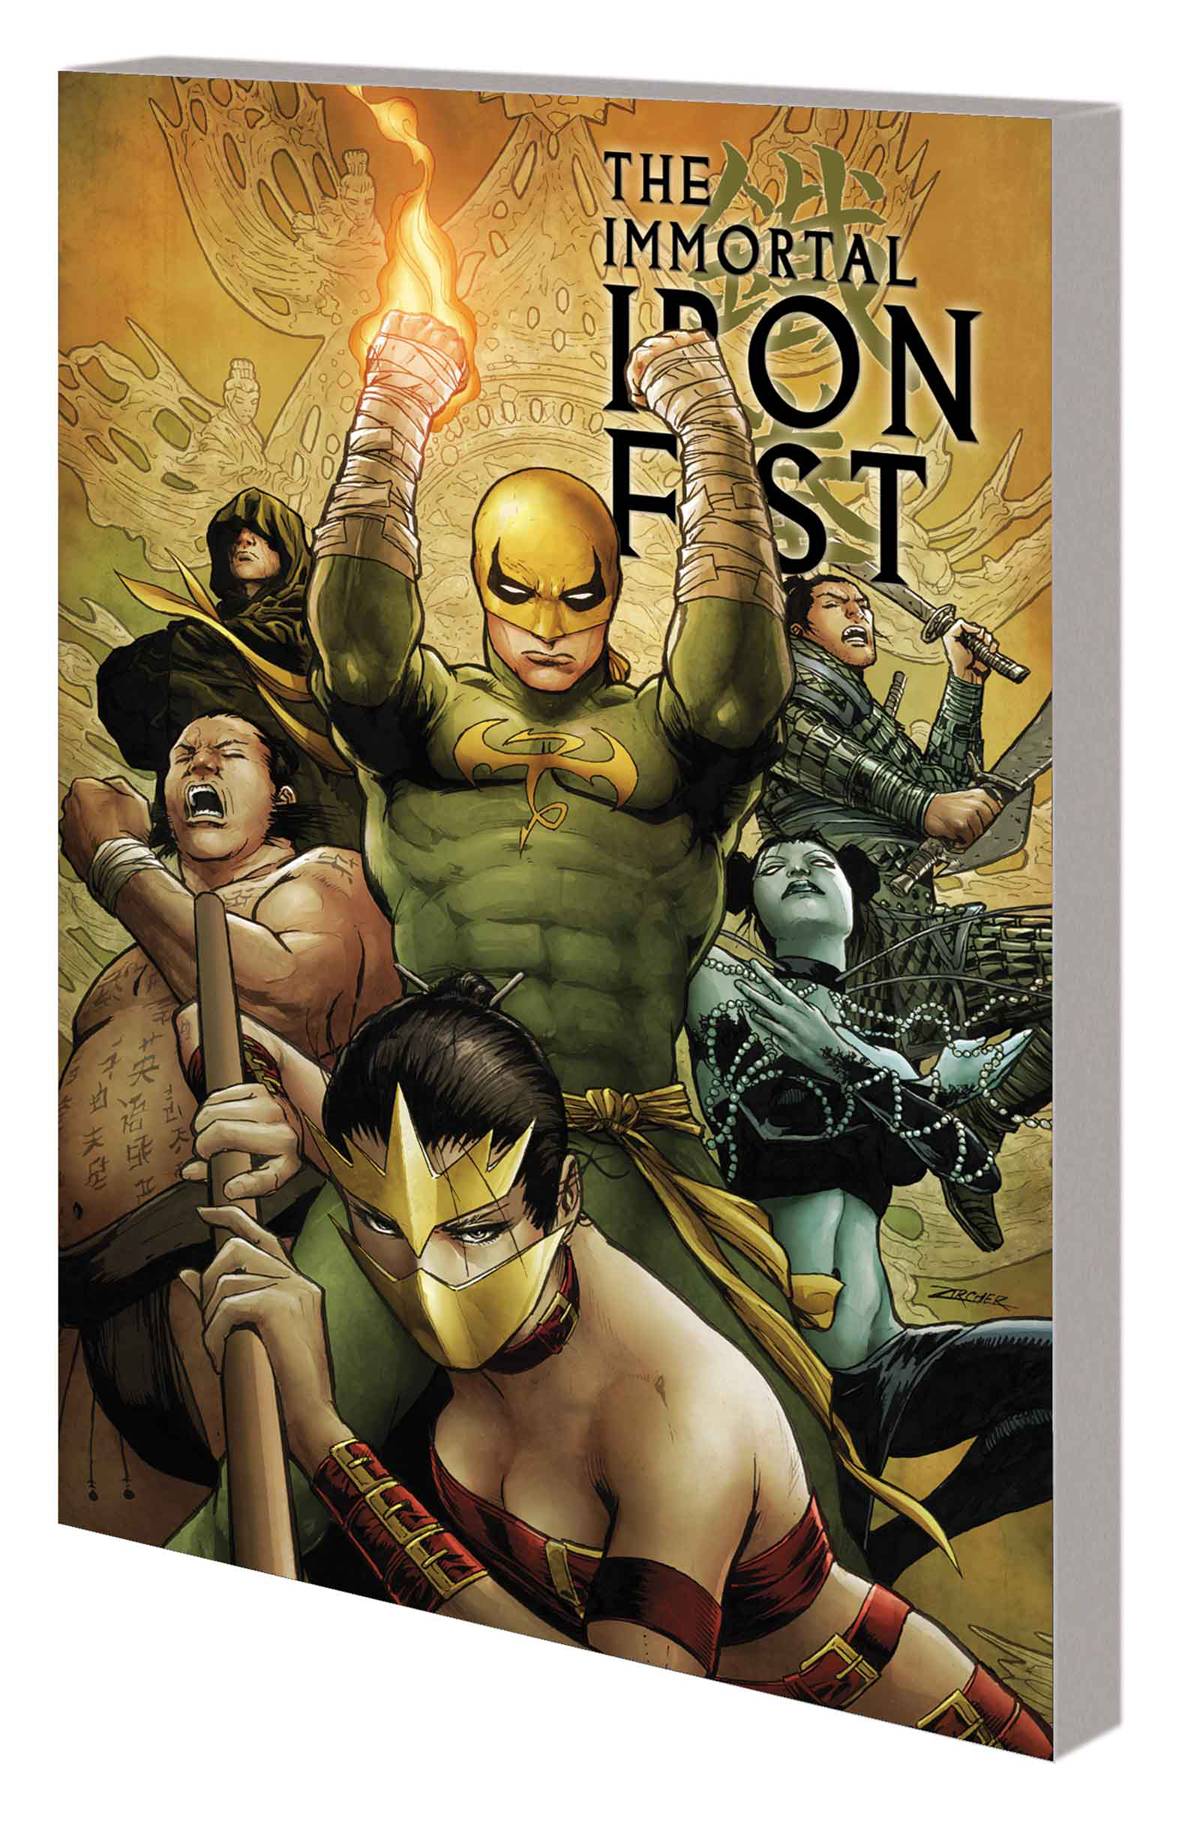 IMMORTAL IRON FIST: THE COMPLETE COLLECTION VOL 02